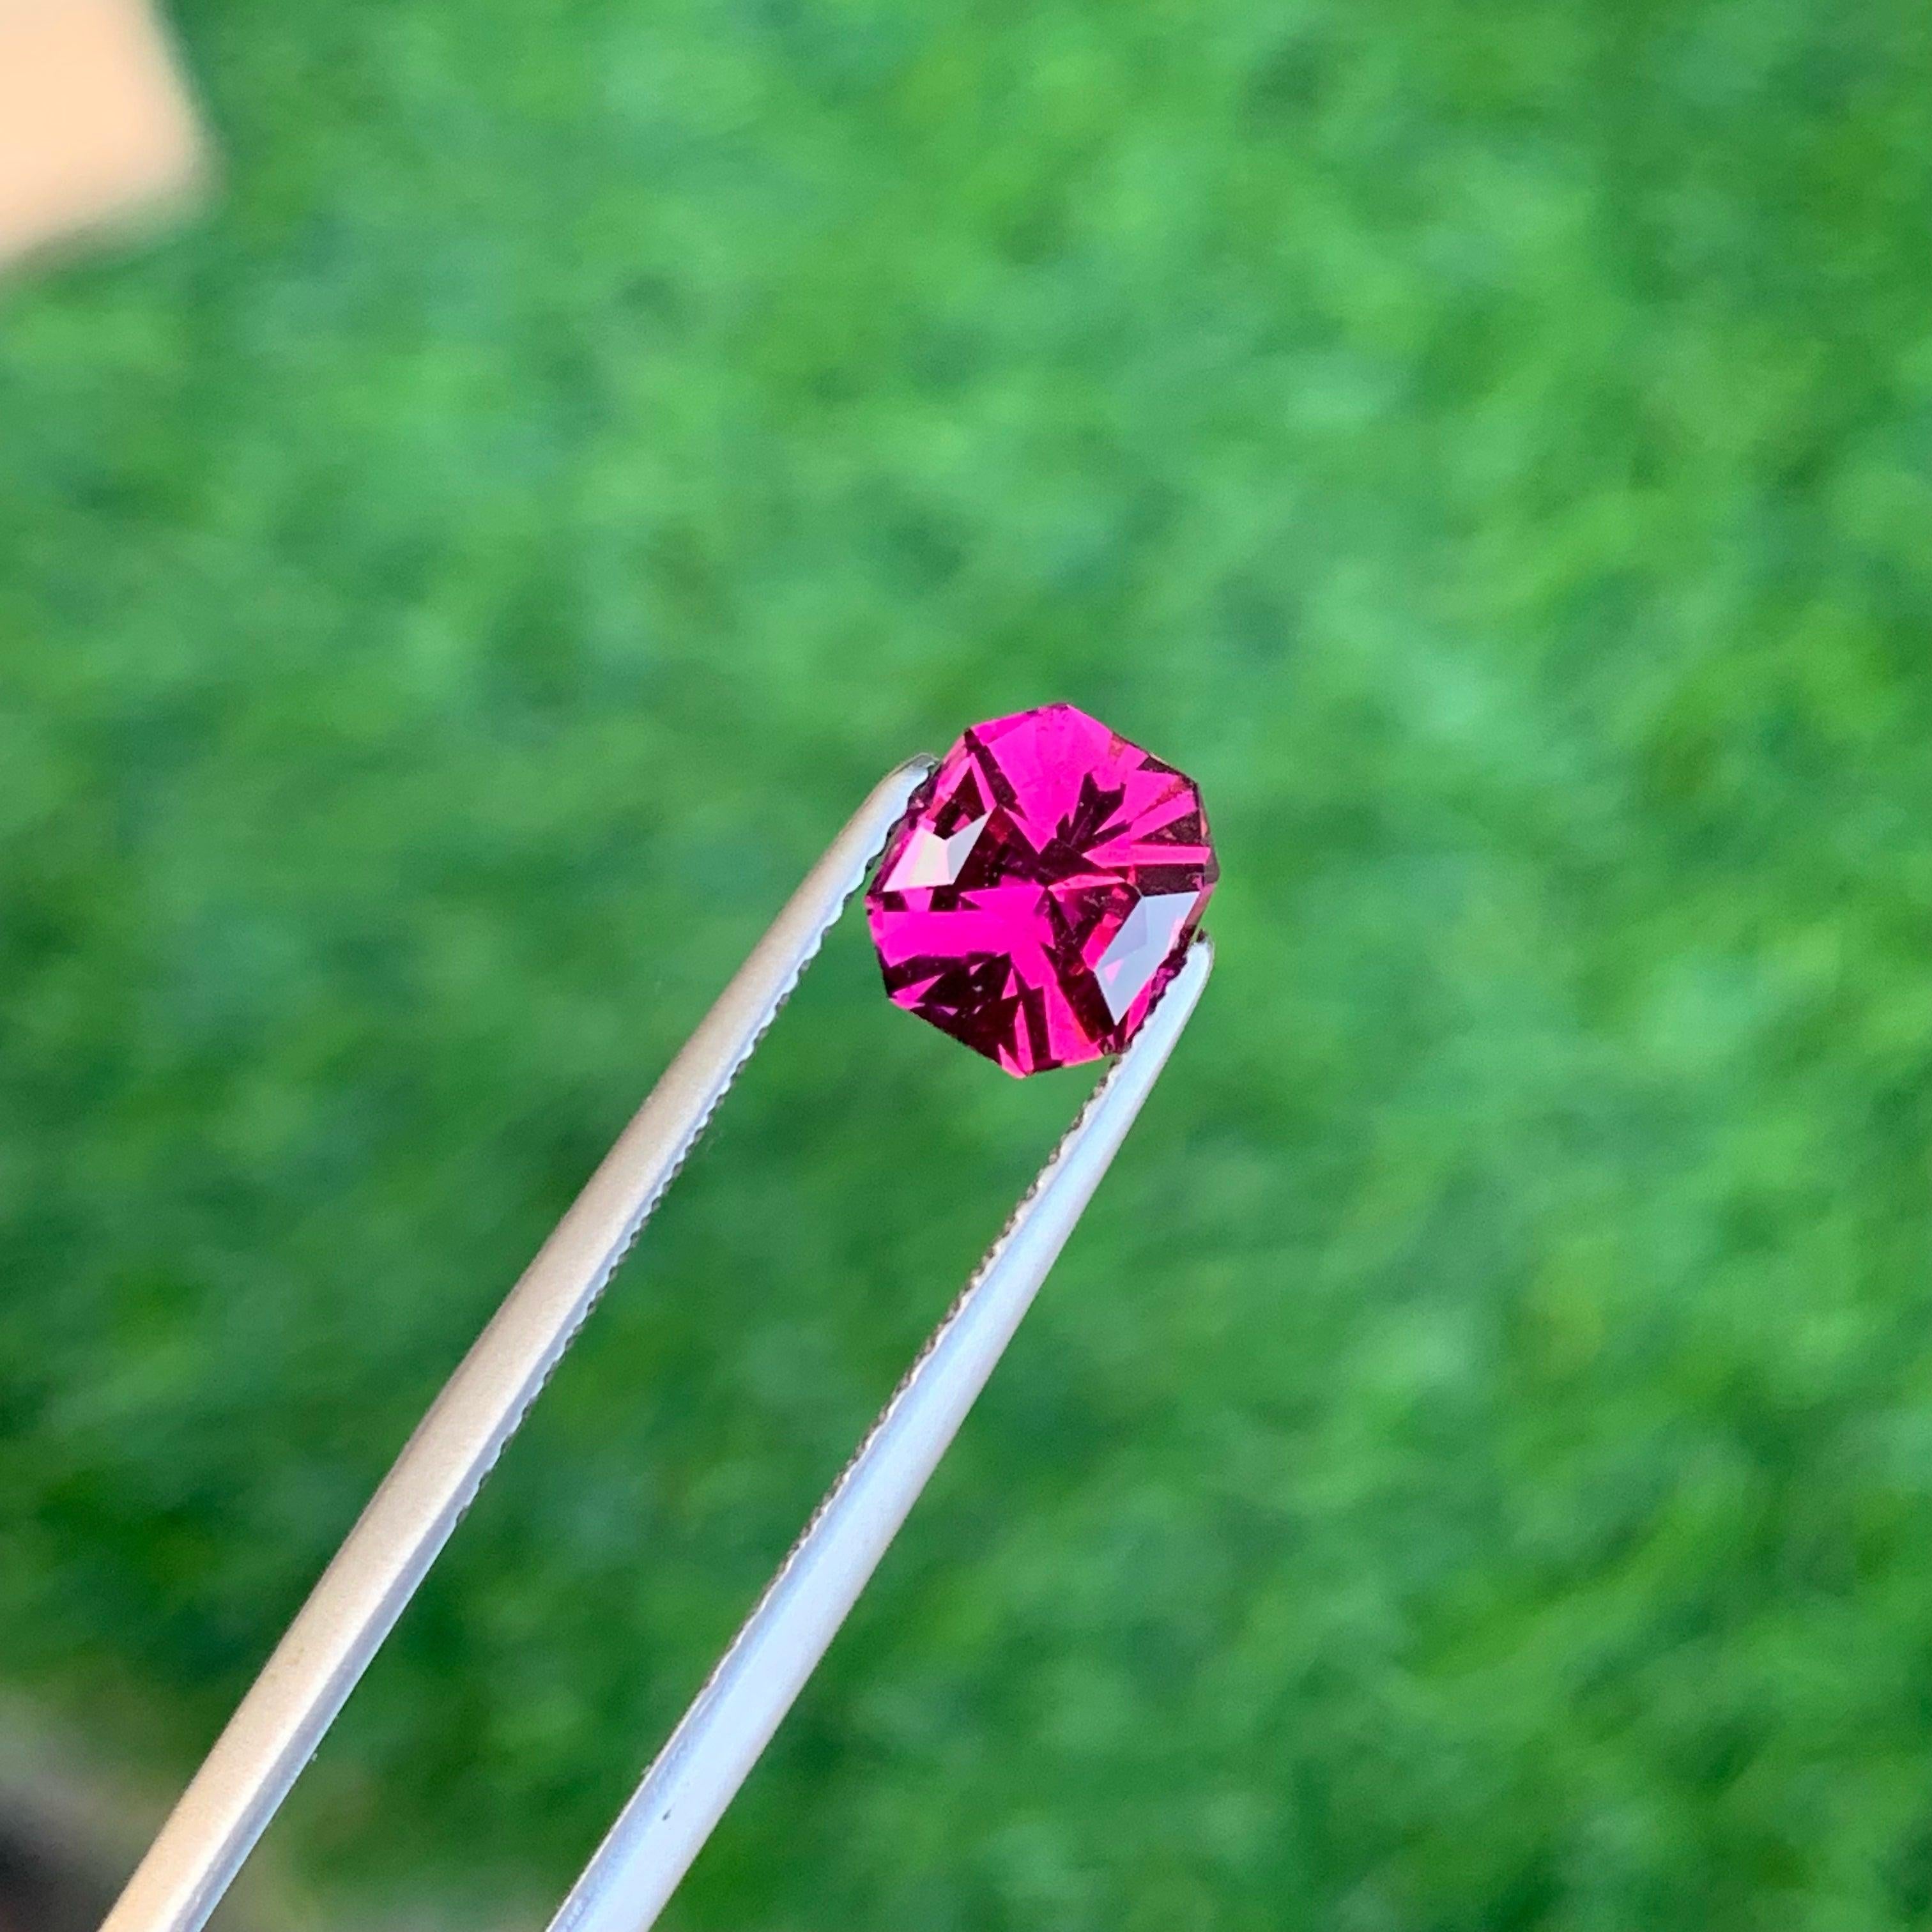 Brilliant Natural Pink Garnet Stone of 1.85 carats from Africa has a wonderful cut in a Octagon shape, incredible Pink color, Great brilliance. This gem is VVS Clarity.

 Product Information:
GEMSTONE NAME: Brilliant Natural Pink Garnet